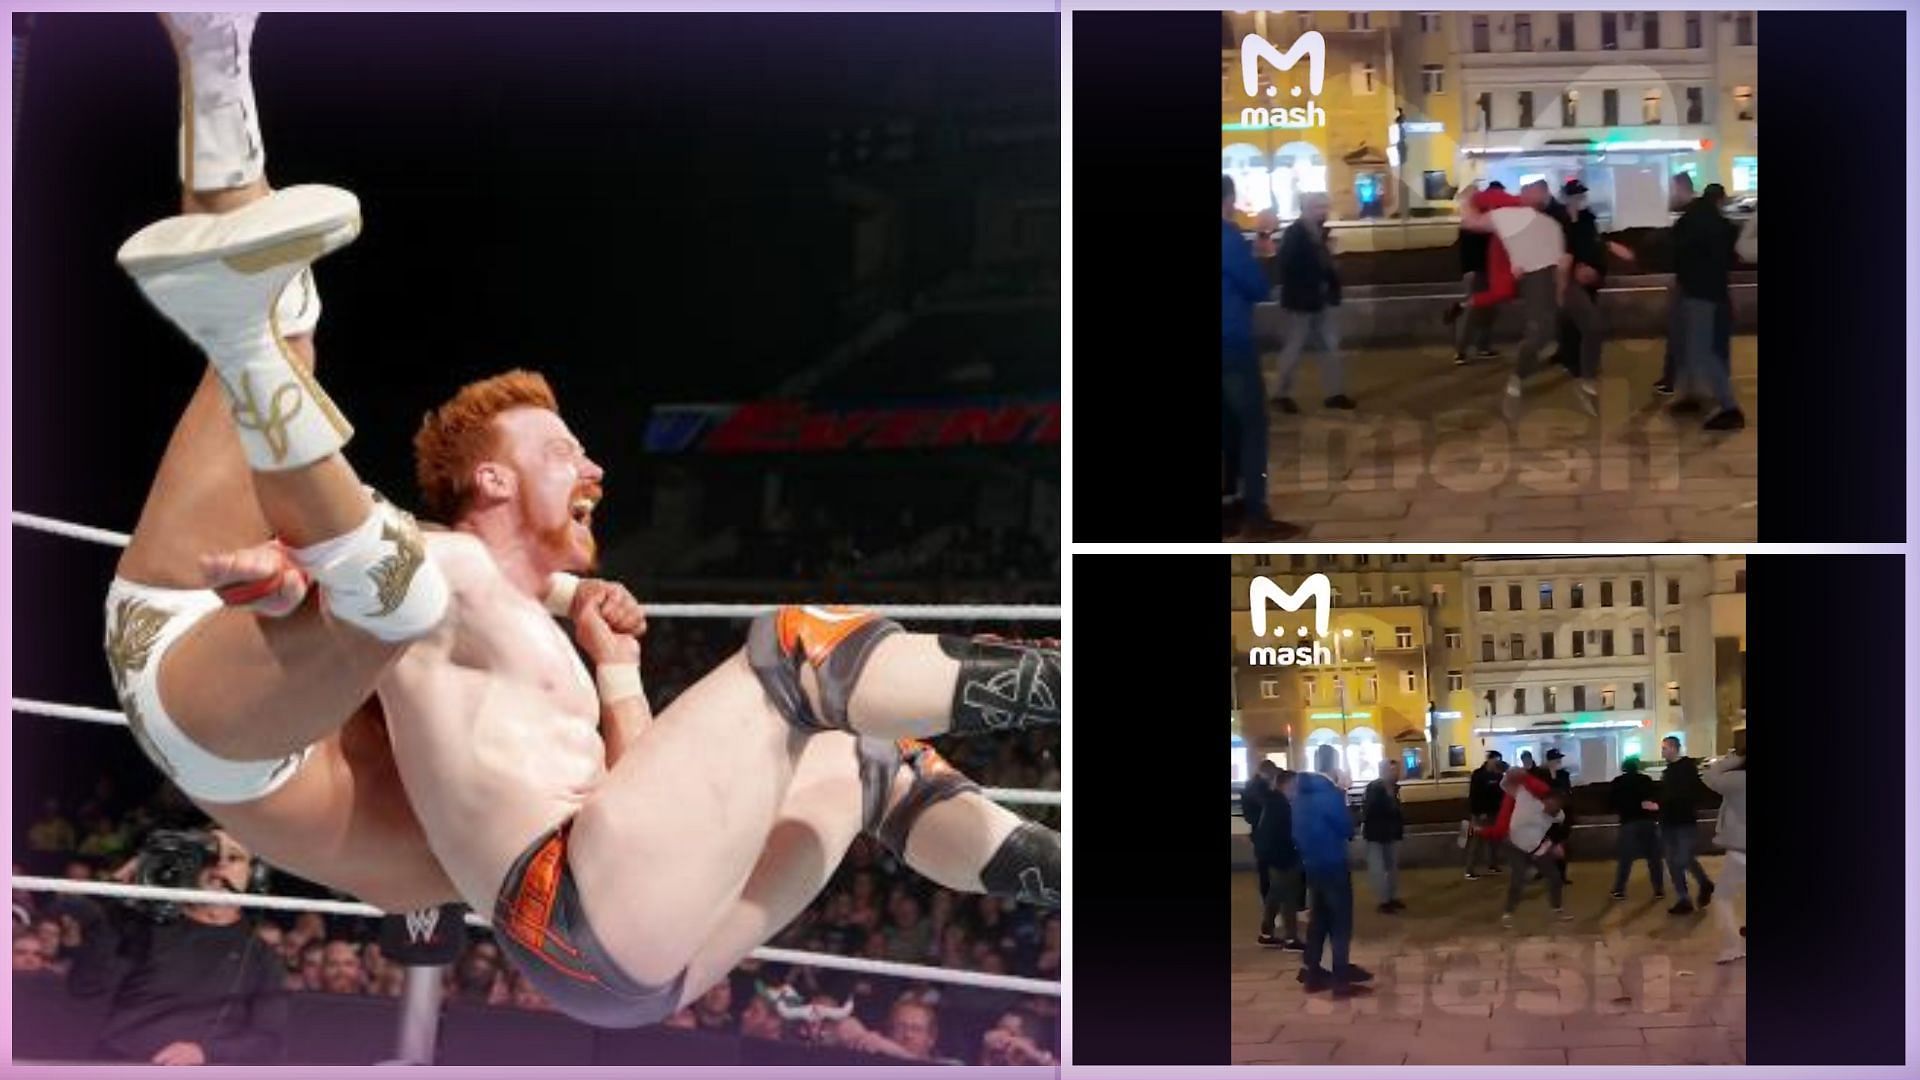 WWE Superstar Sheamus delivering a White Noise to an opponent. 